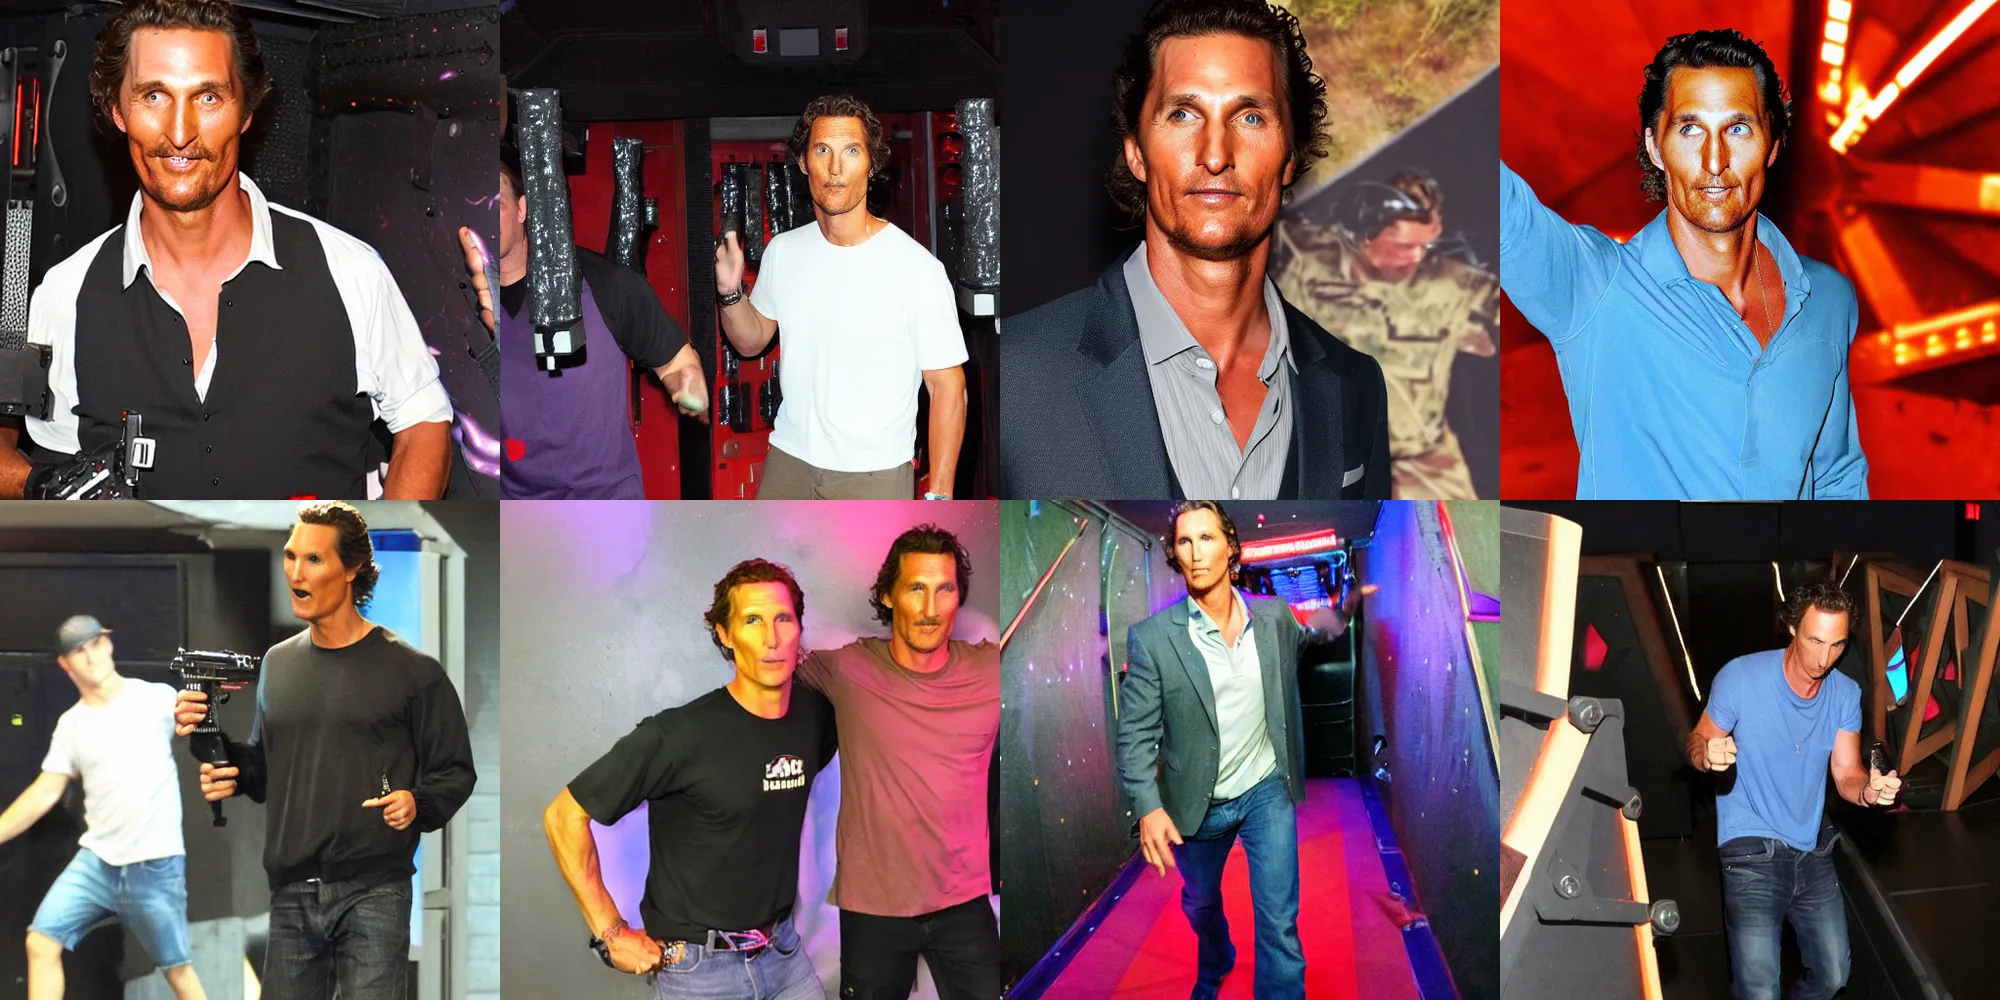 Prompt: Matthew mcconaughey playing laser tag